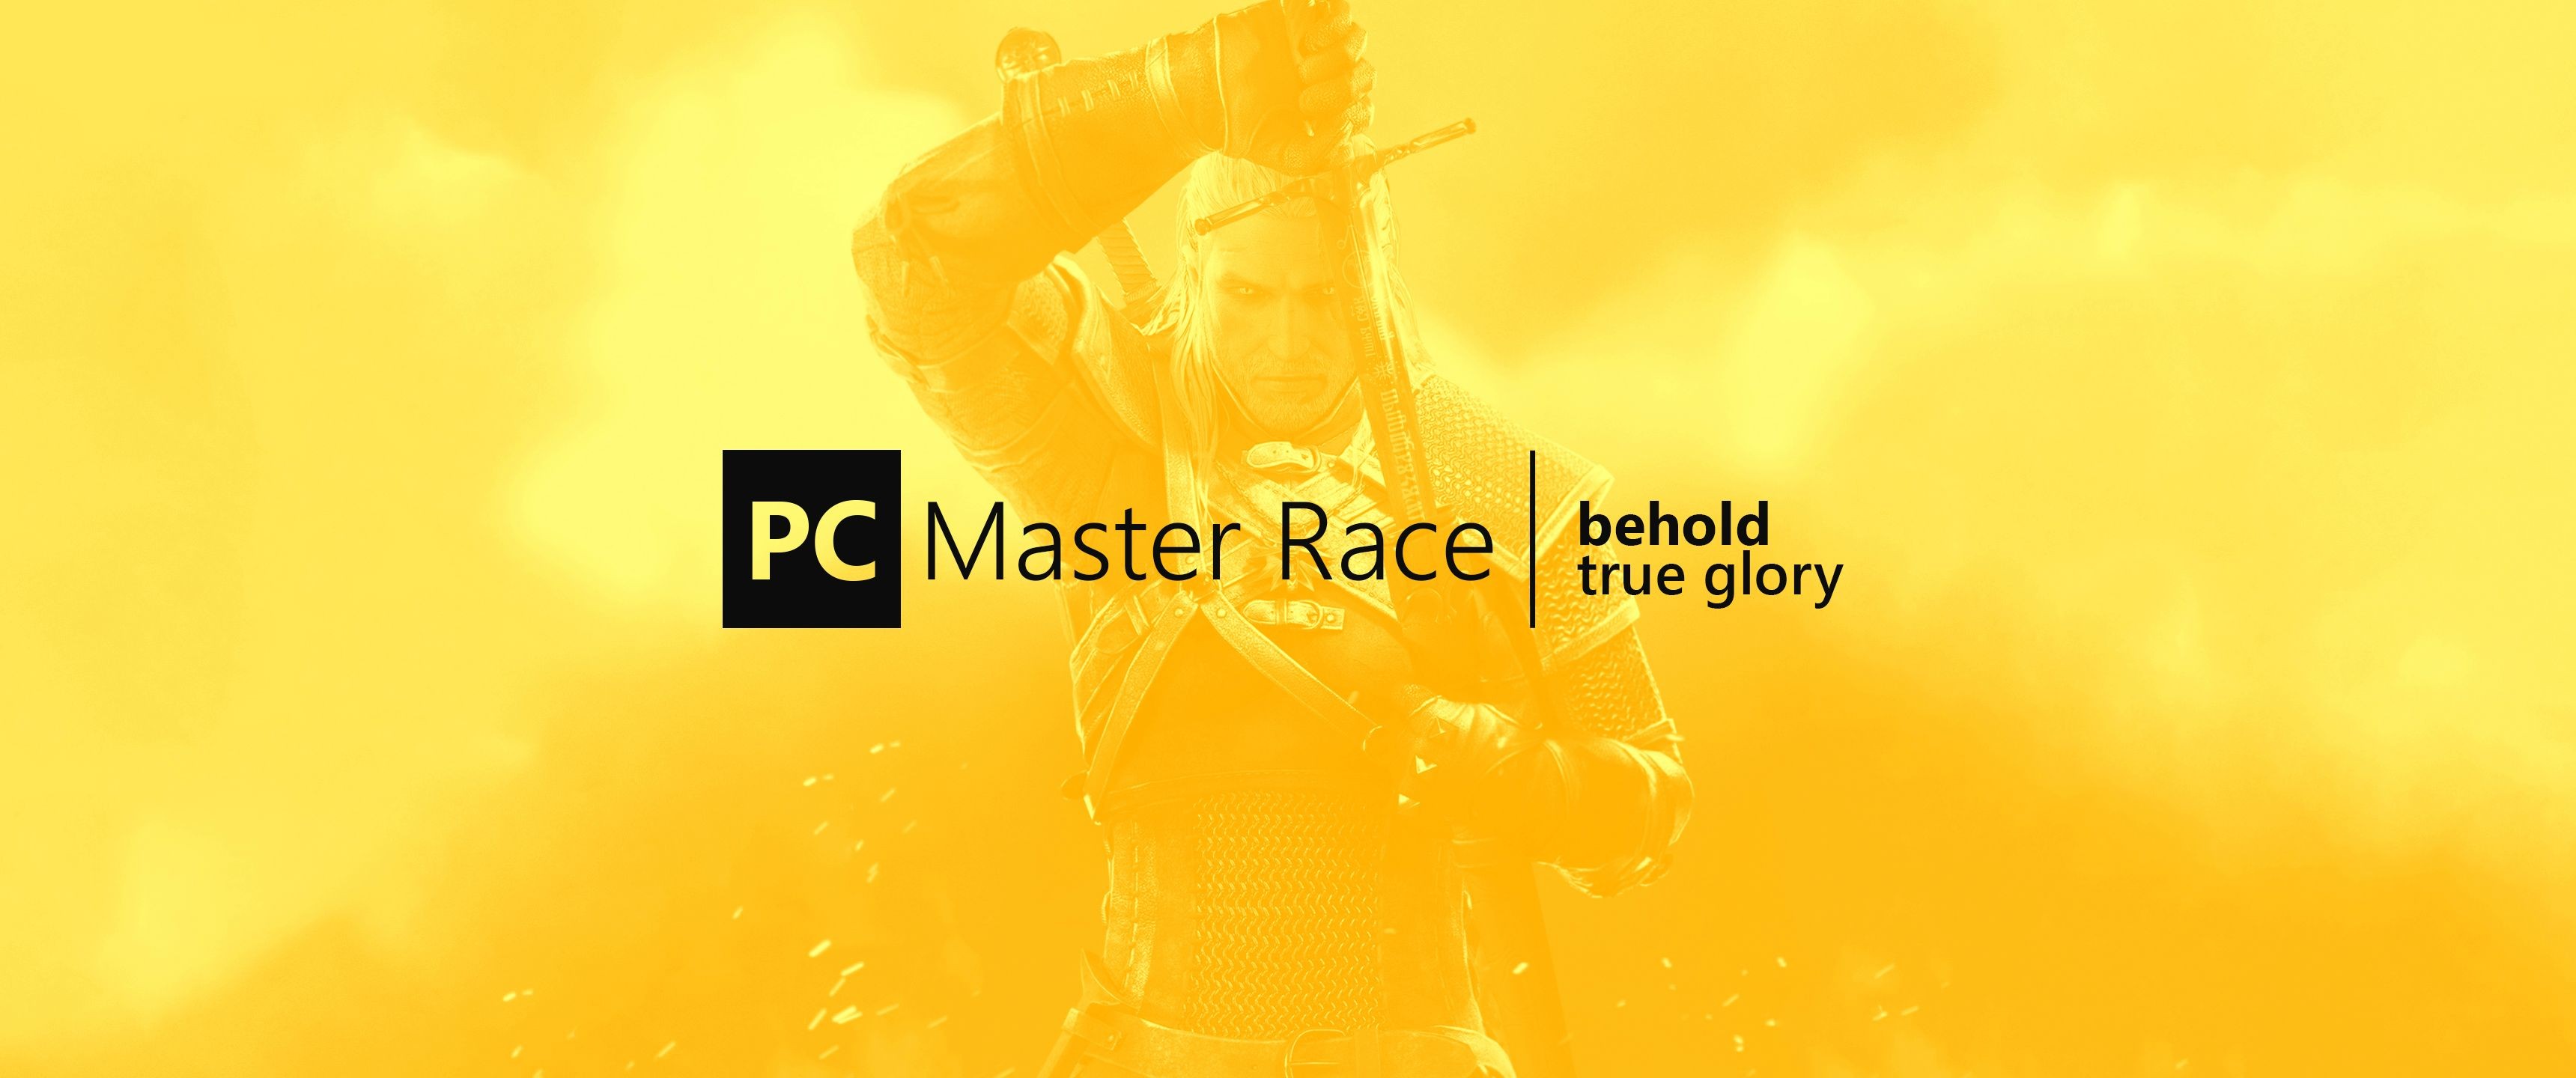 PC Master Race PC Gaming Geralt Of Rivia The Witcher The Witcher 3 Wild Hunt 3440x1440